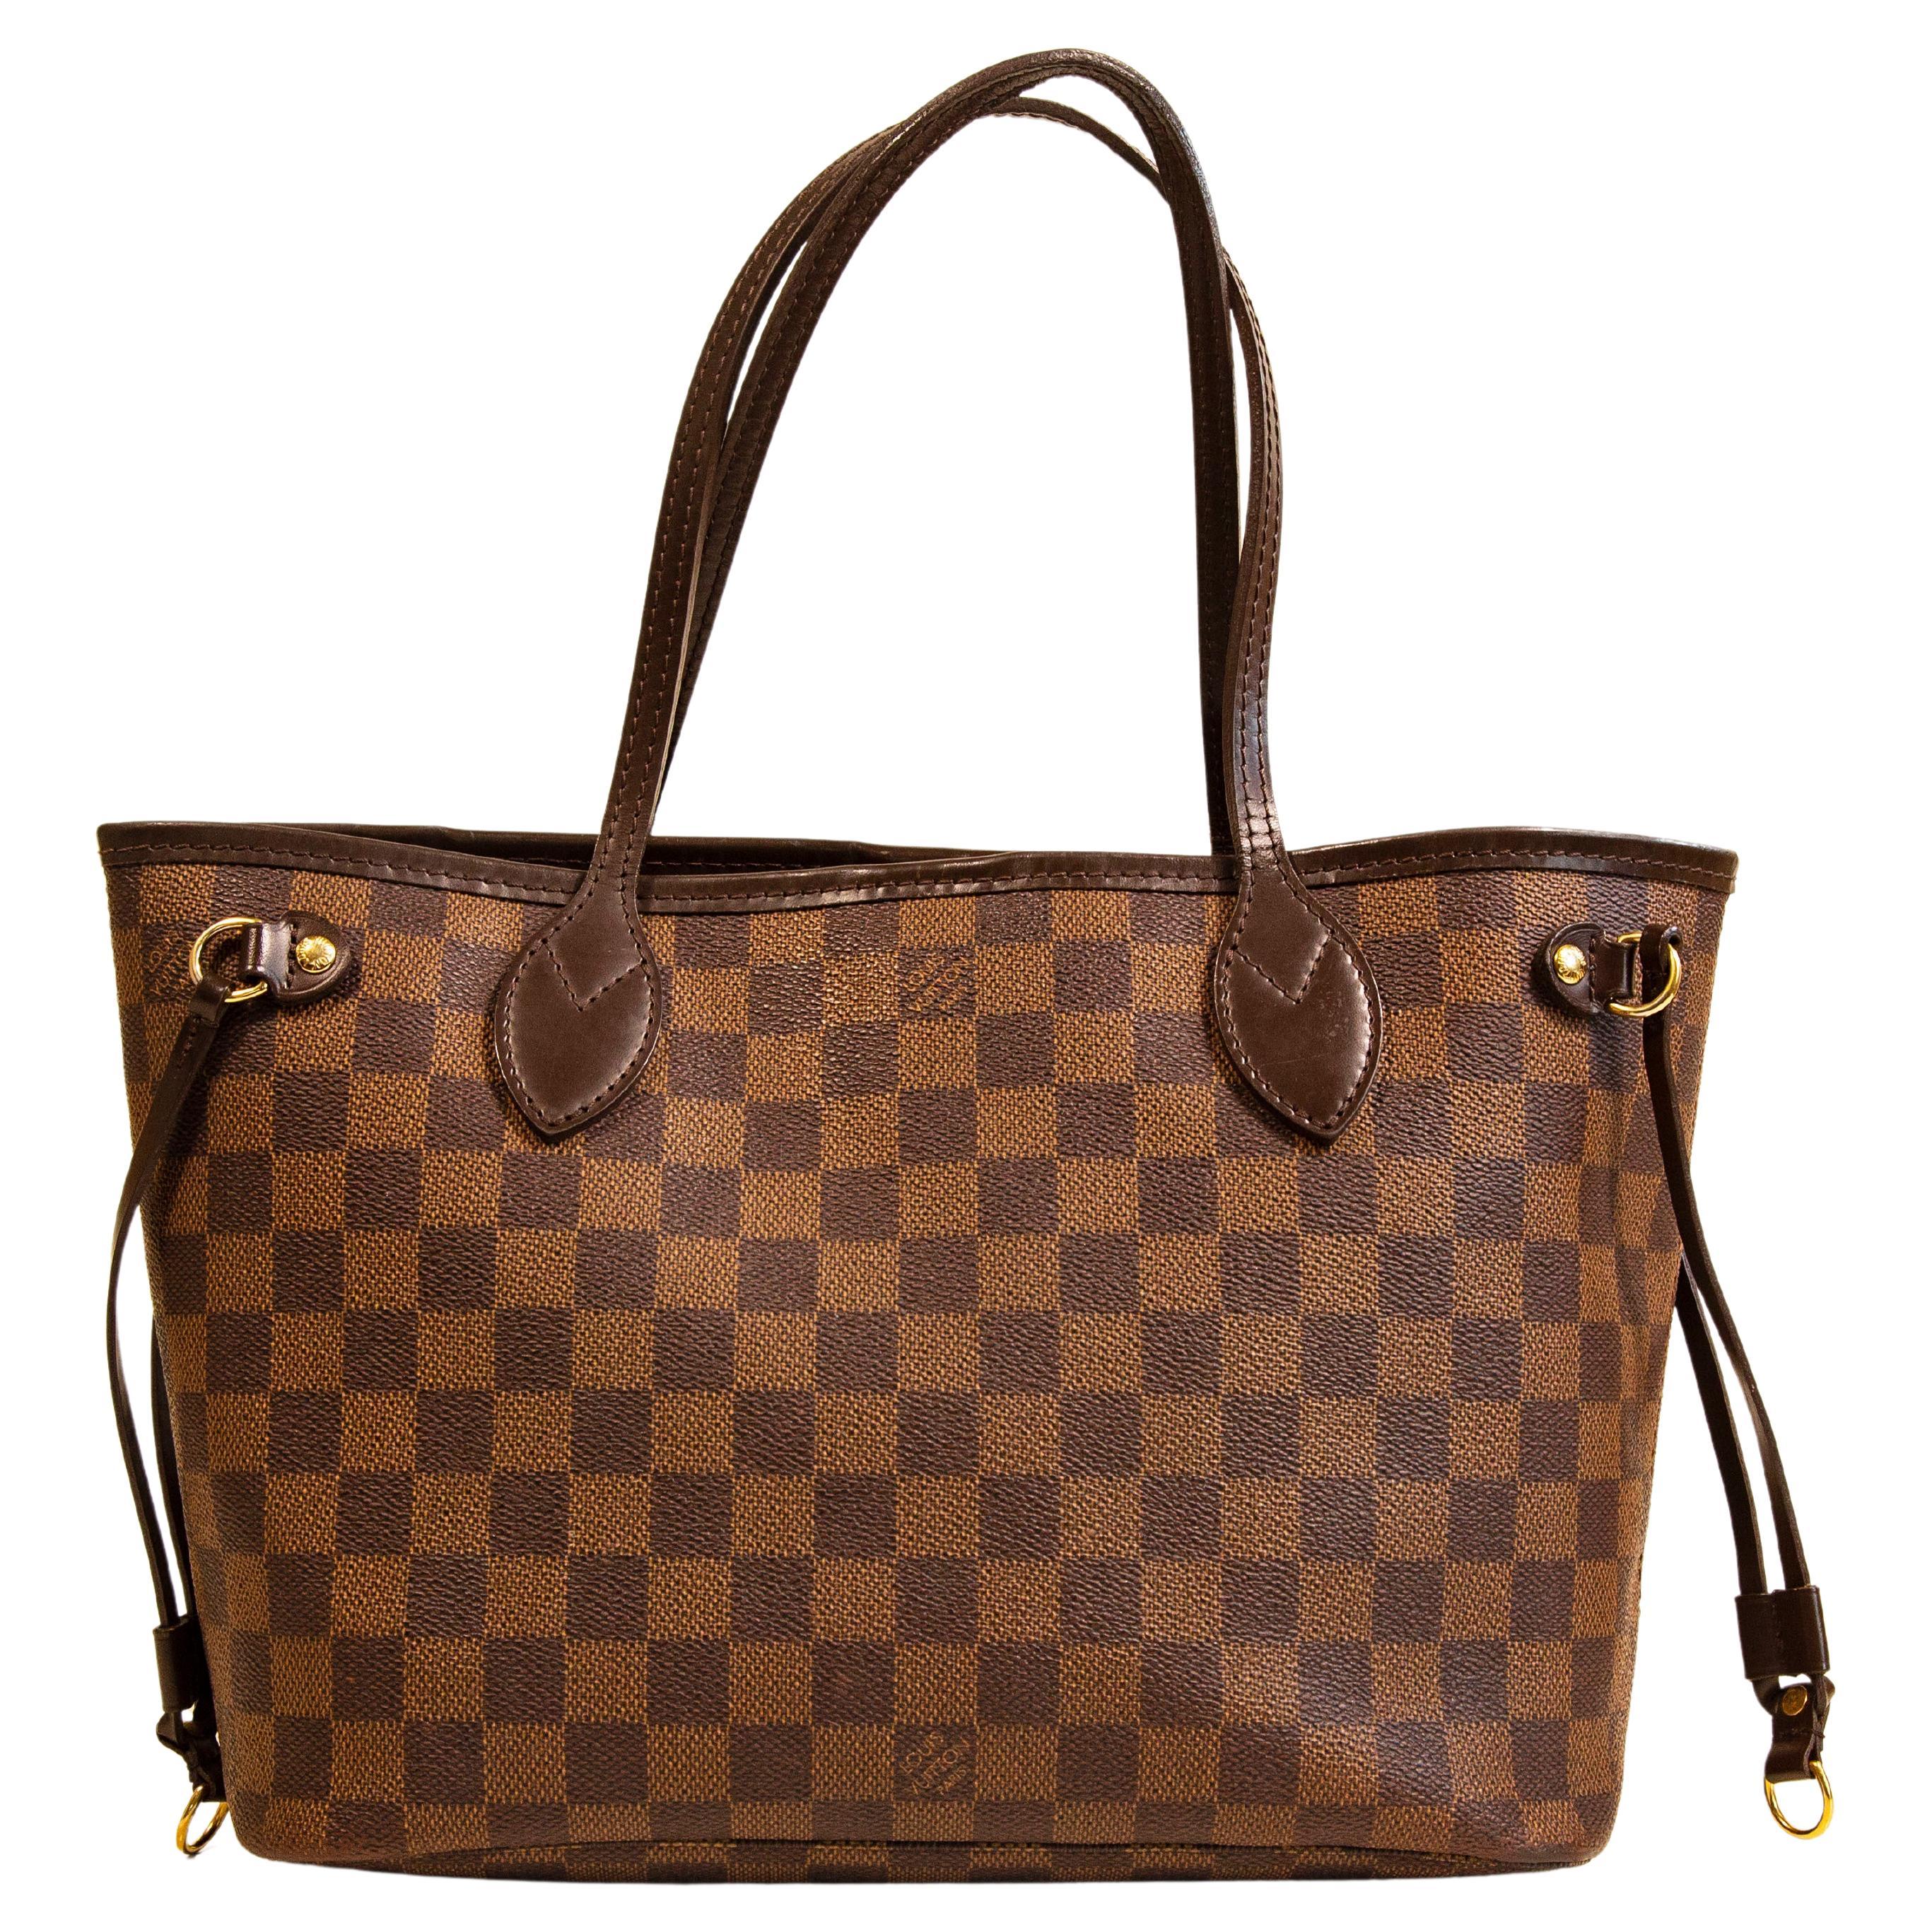 Louis Vuitton Neverfull PM Tote Shoulder Bag in Damier Ebene For Sale